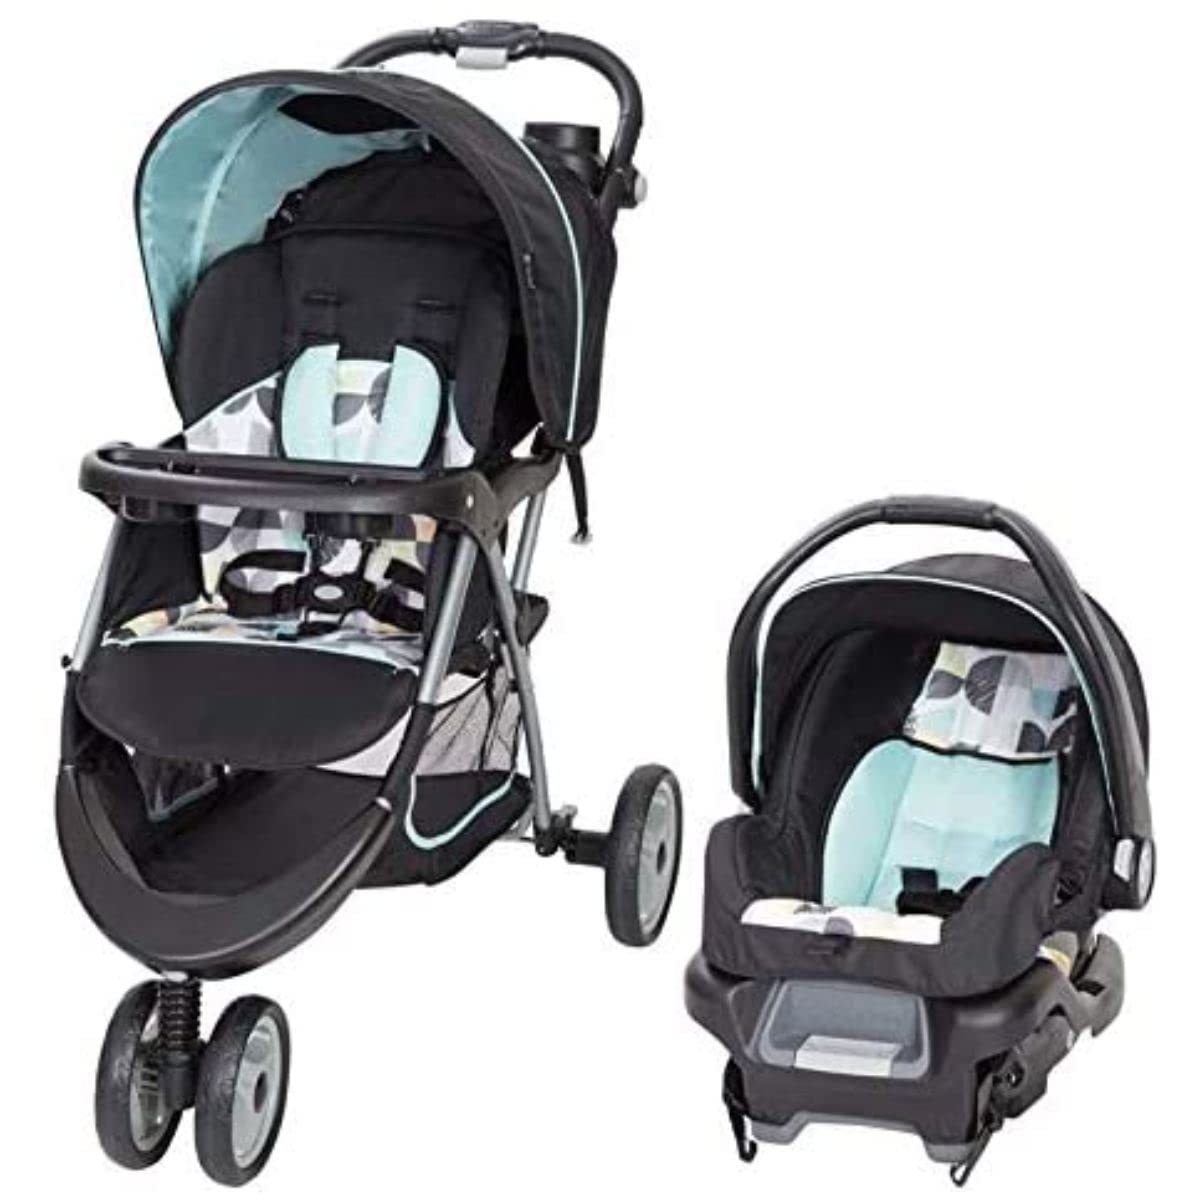 baby-trend-ez-ride-35-travel-system-with-car-seat